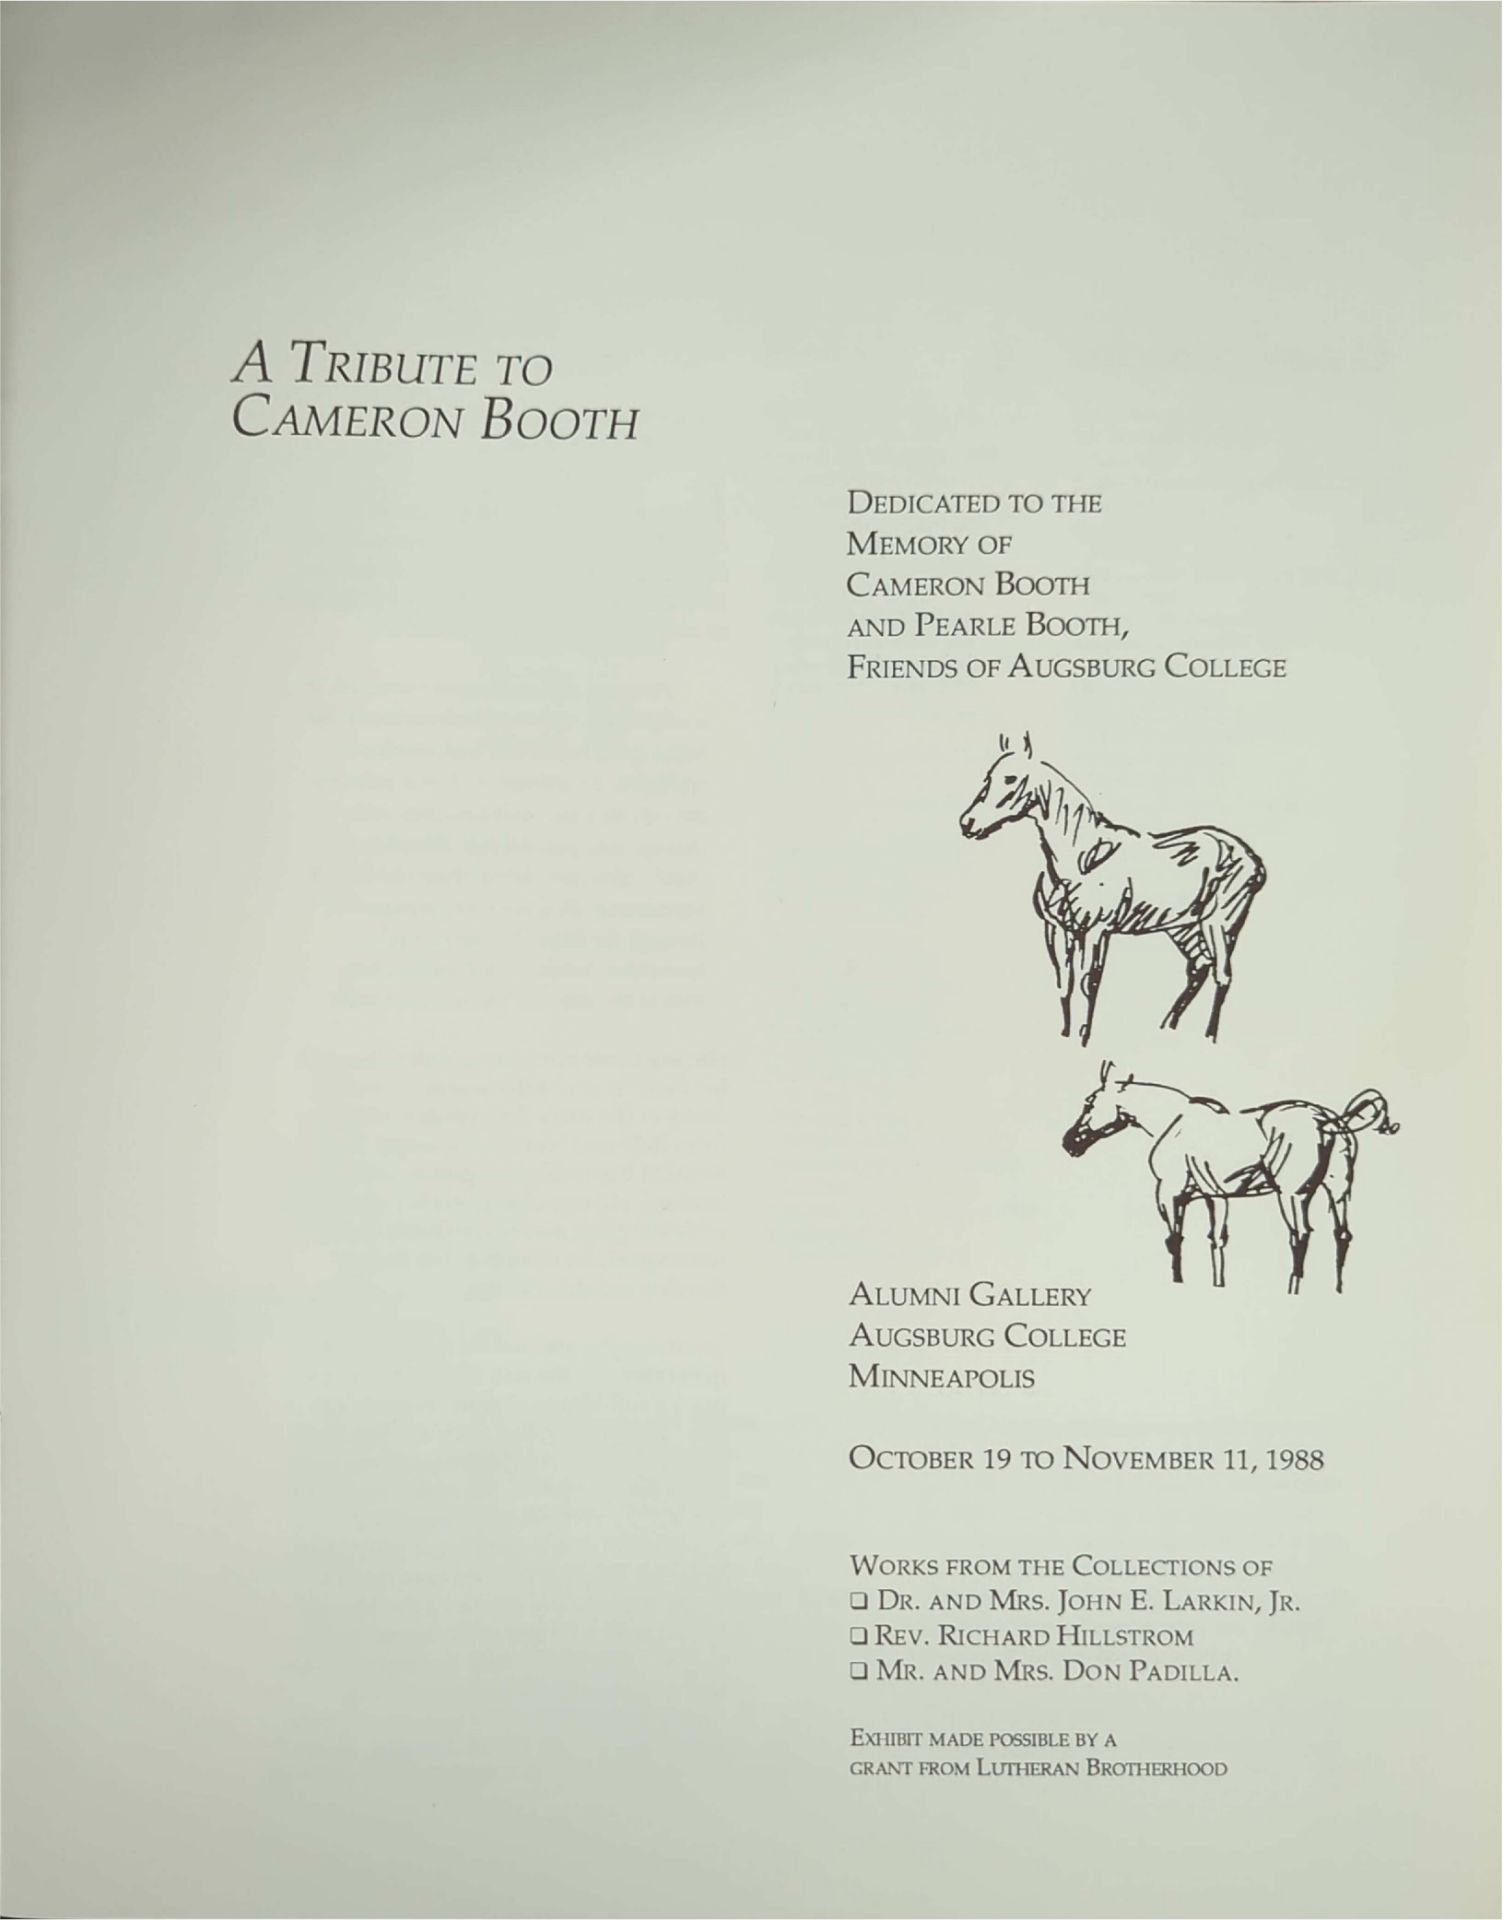 Cameron Booth "2 Bays 2 Greys" Horse Painting 1972 - Image 12 of 13